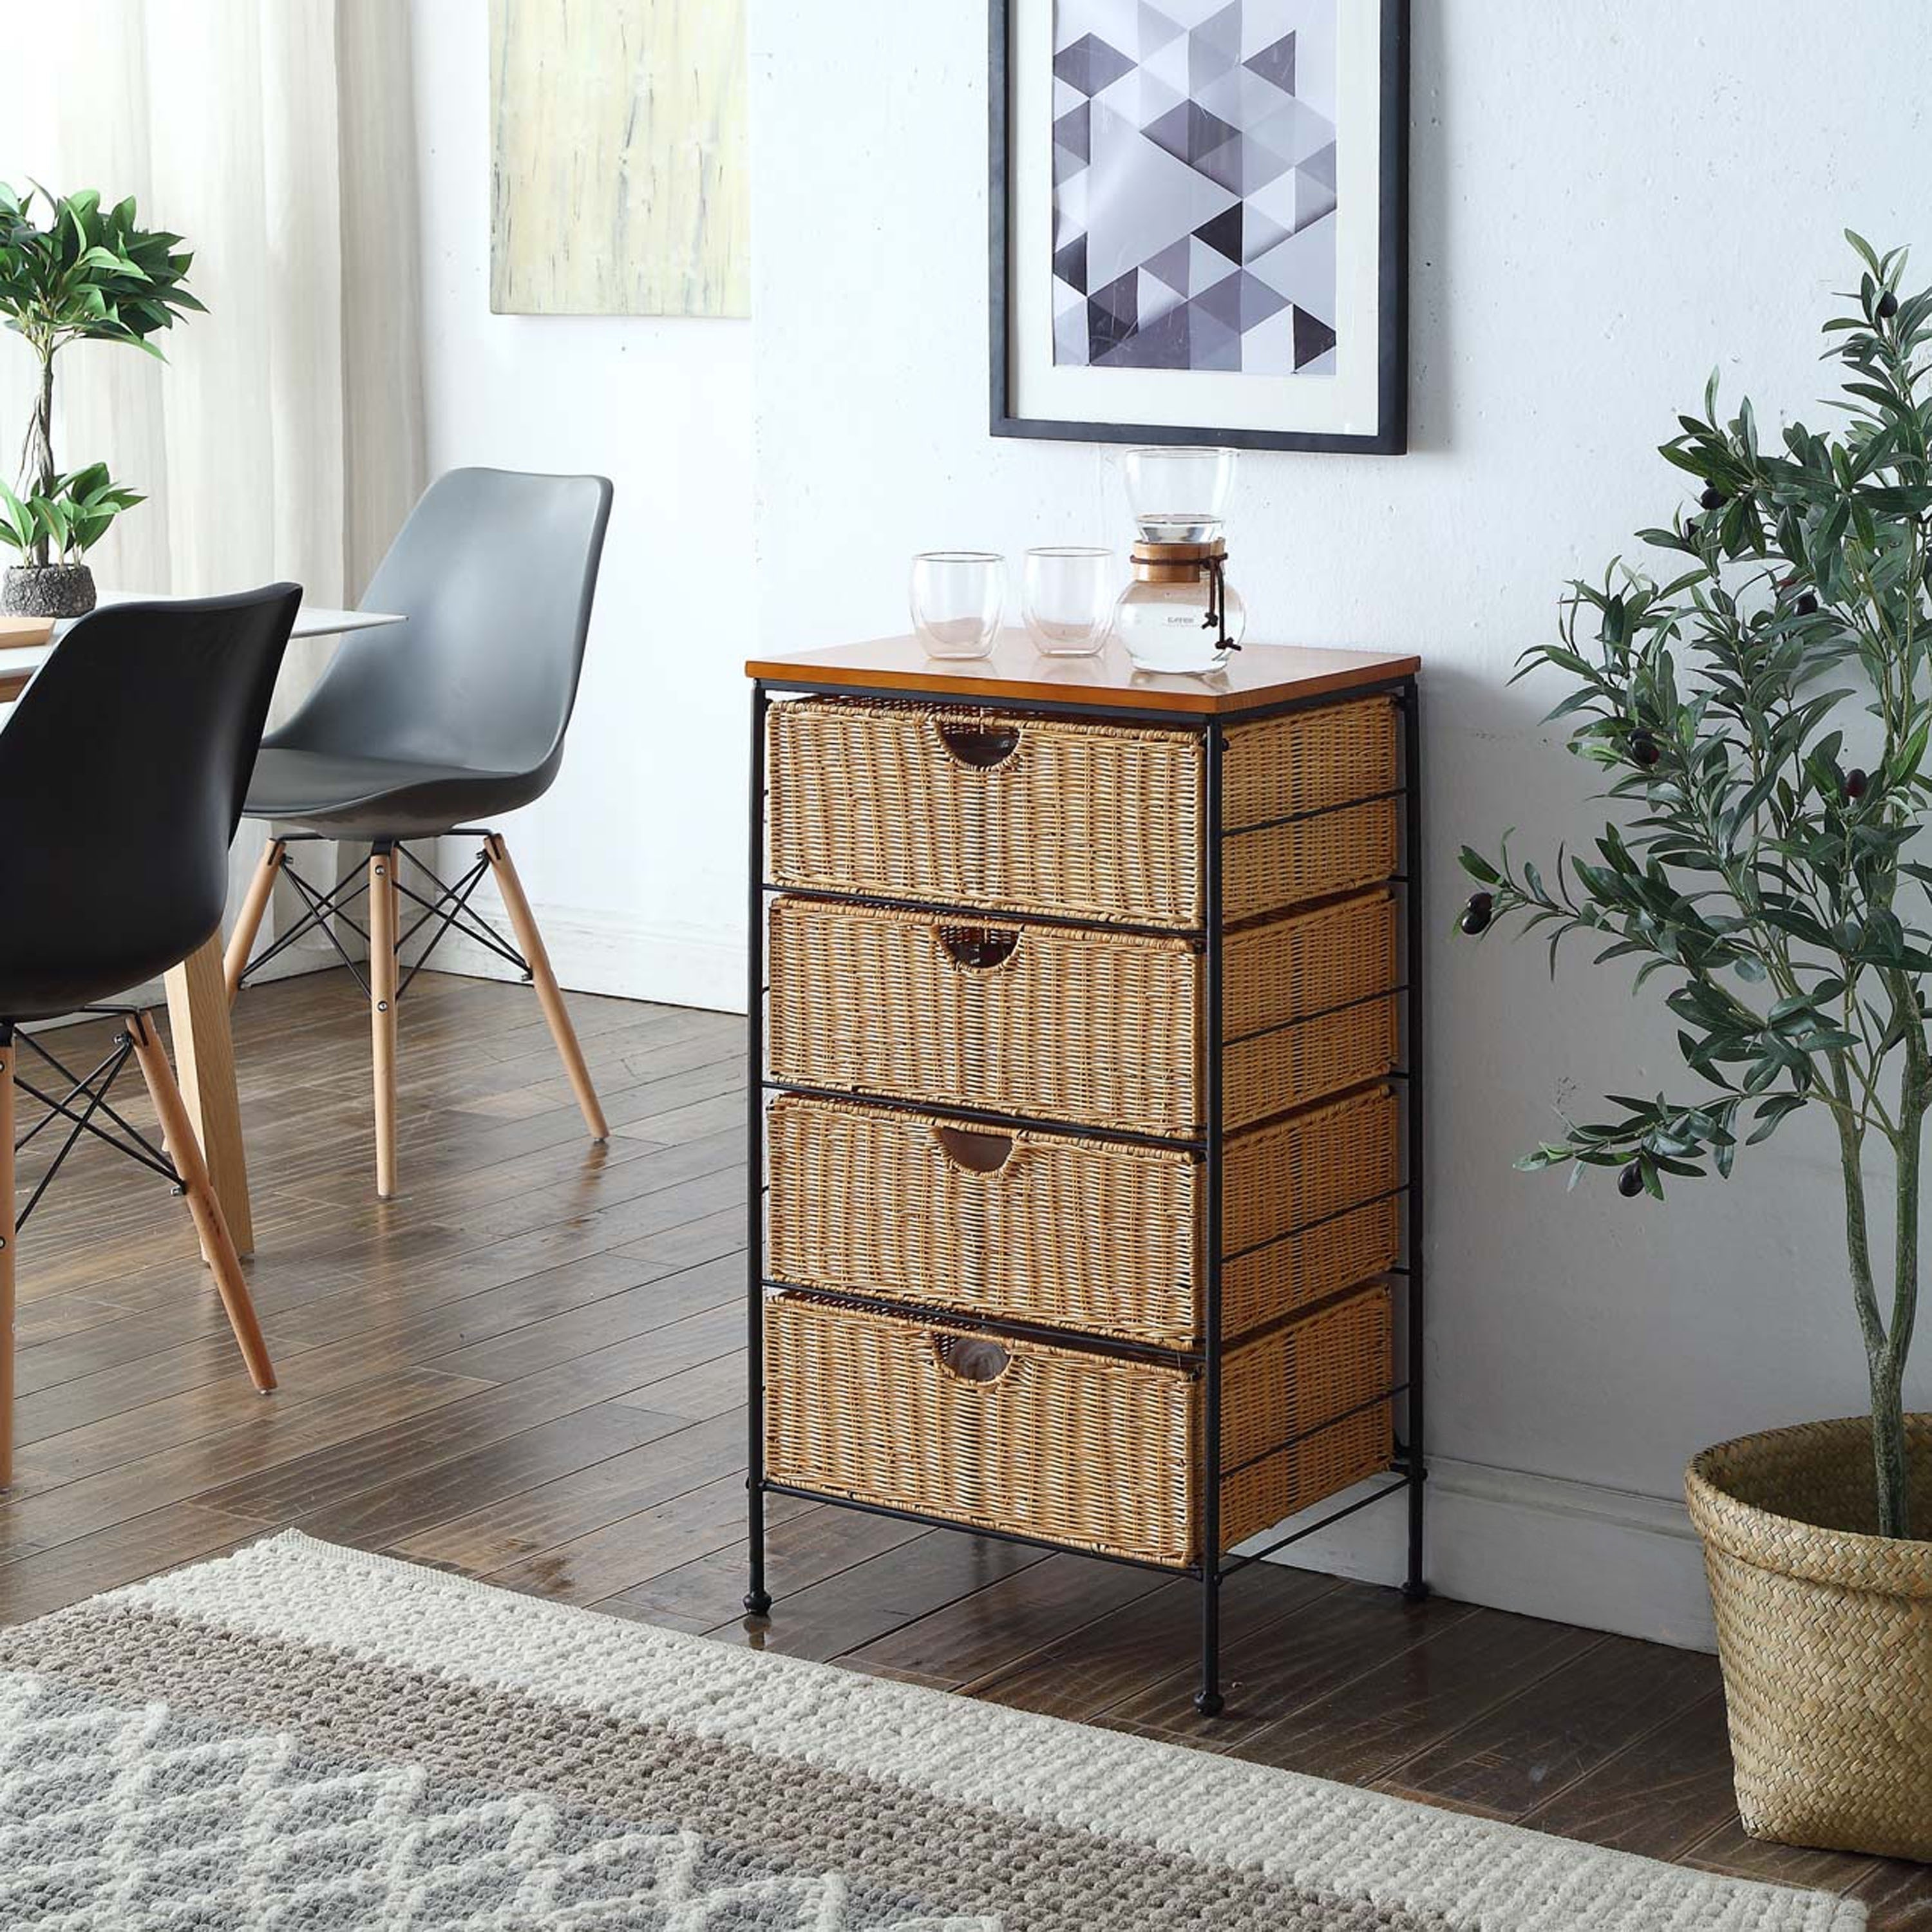 Shop 4 Drawer Chest With Honey Colored Wicker And Black Metal